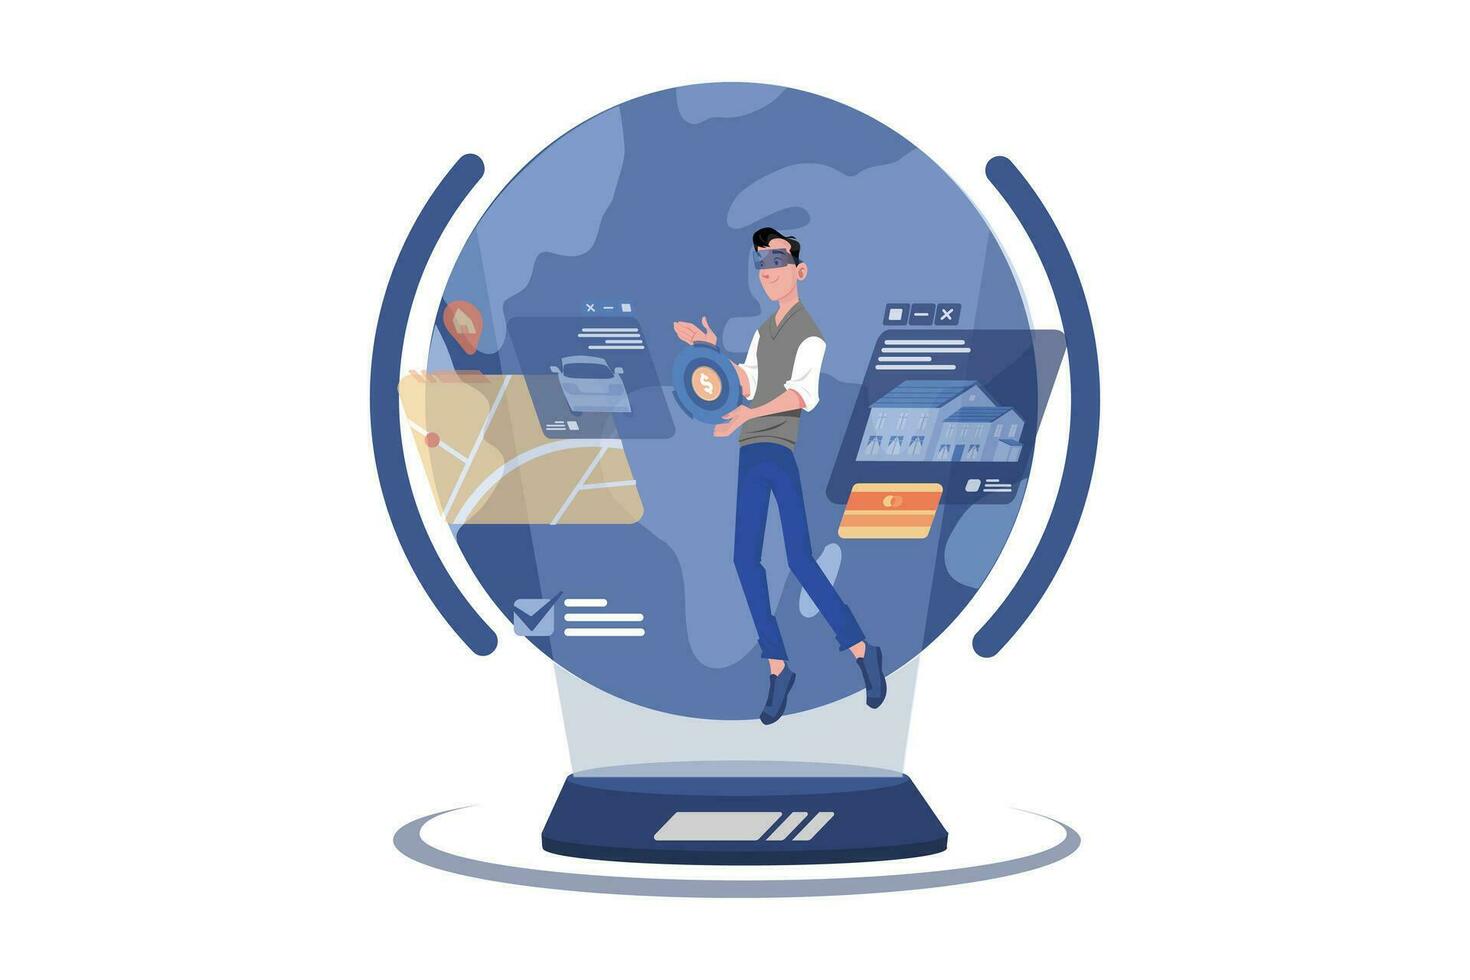 https://static.vecteezy.com/system/resources/previews/028/046/103/non_2x/metaverse-property-illustration-concept-vector.jpg